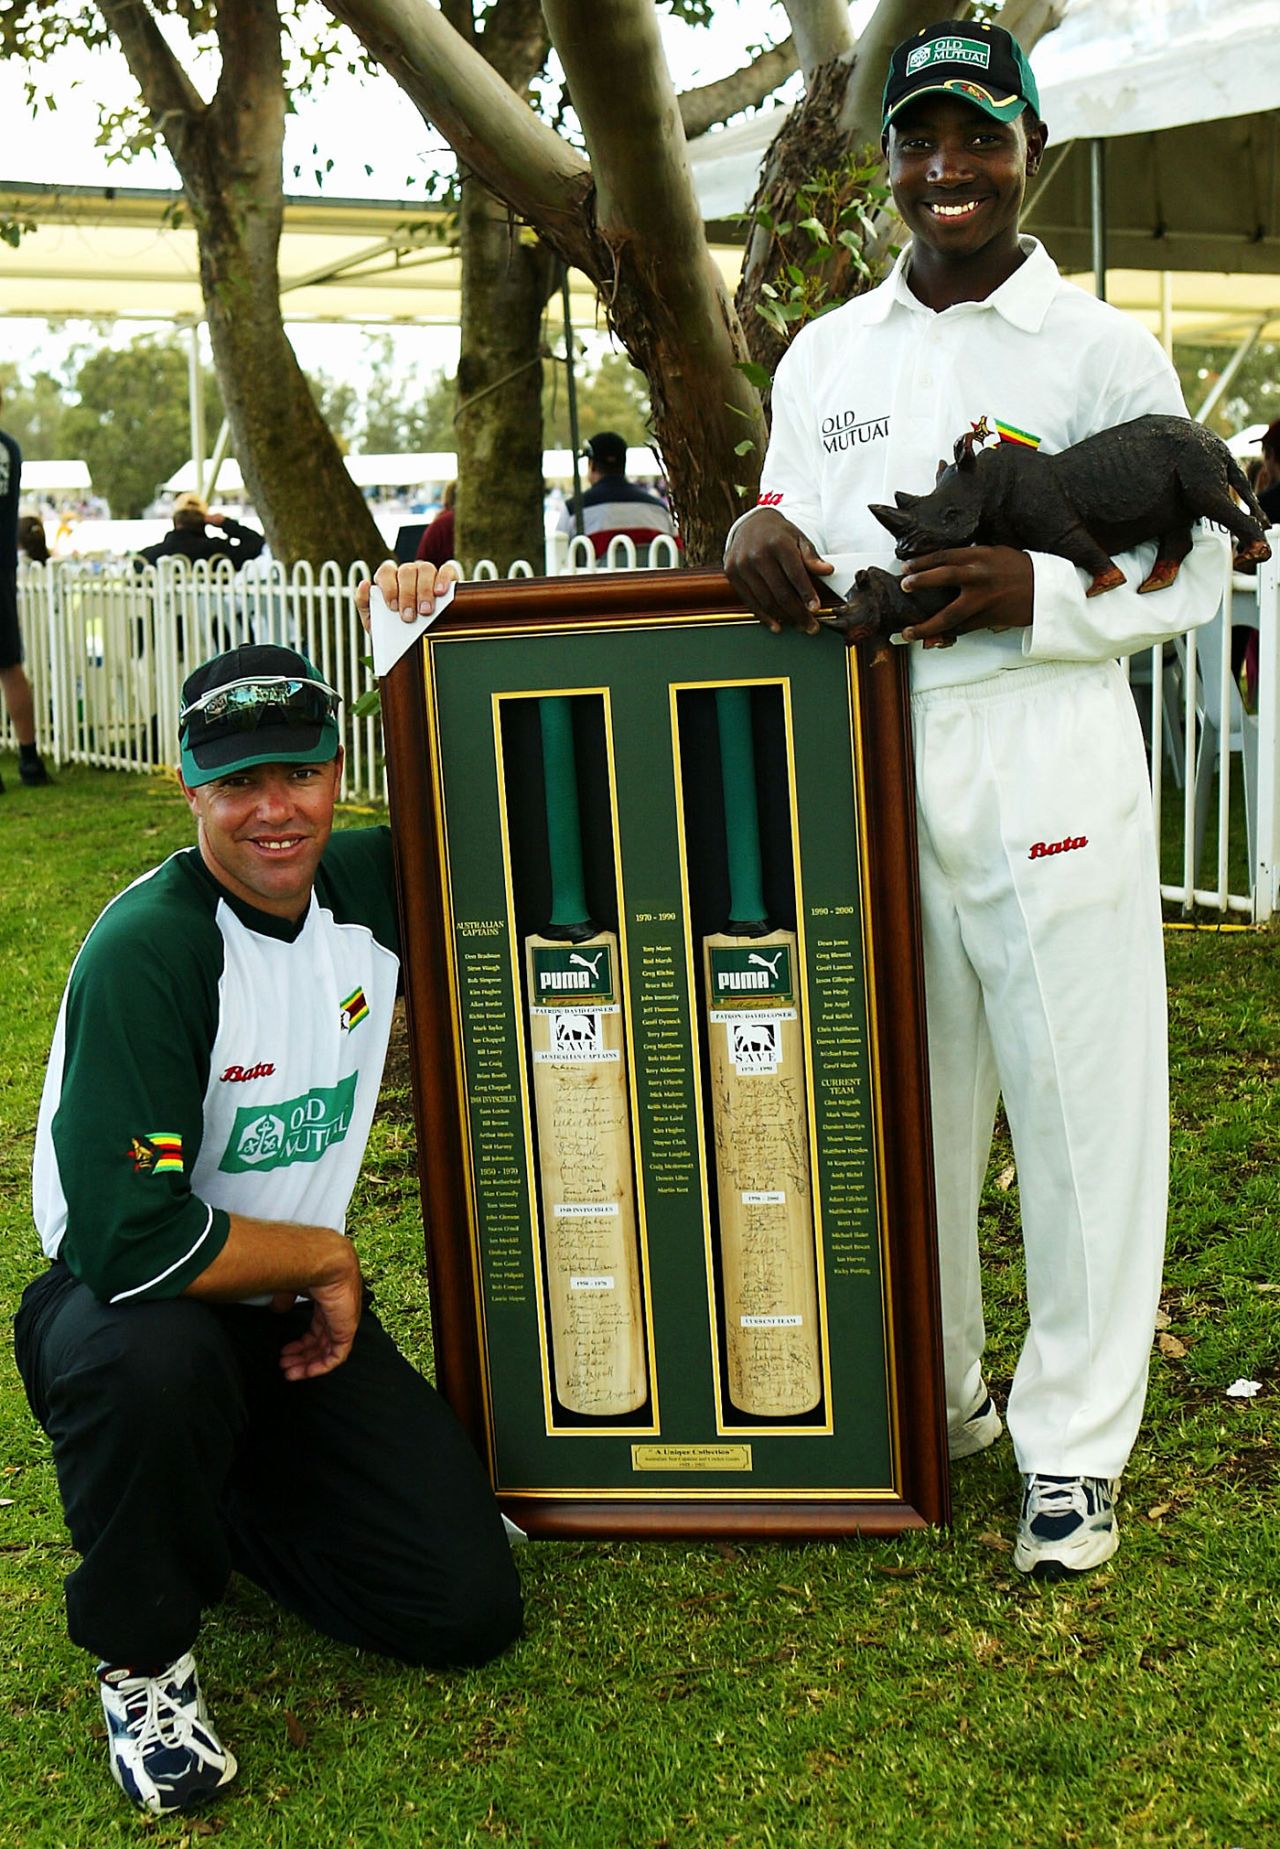 Heath Streak and Tatenda Taibu with bats signed by current and former Australian cricketers be auctioned to raise money to save the Black Rhino, Chairman's XI v Zimbabwe, Perth, October 1, 2003